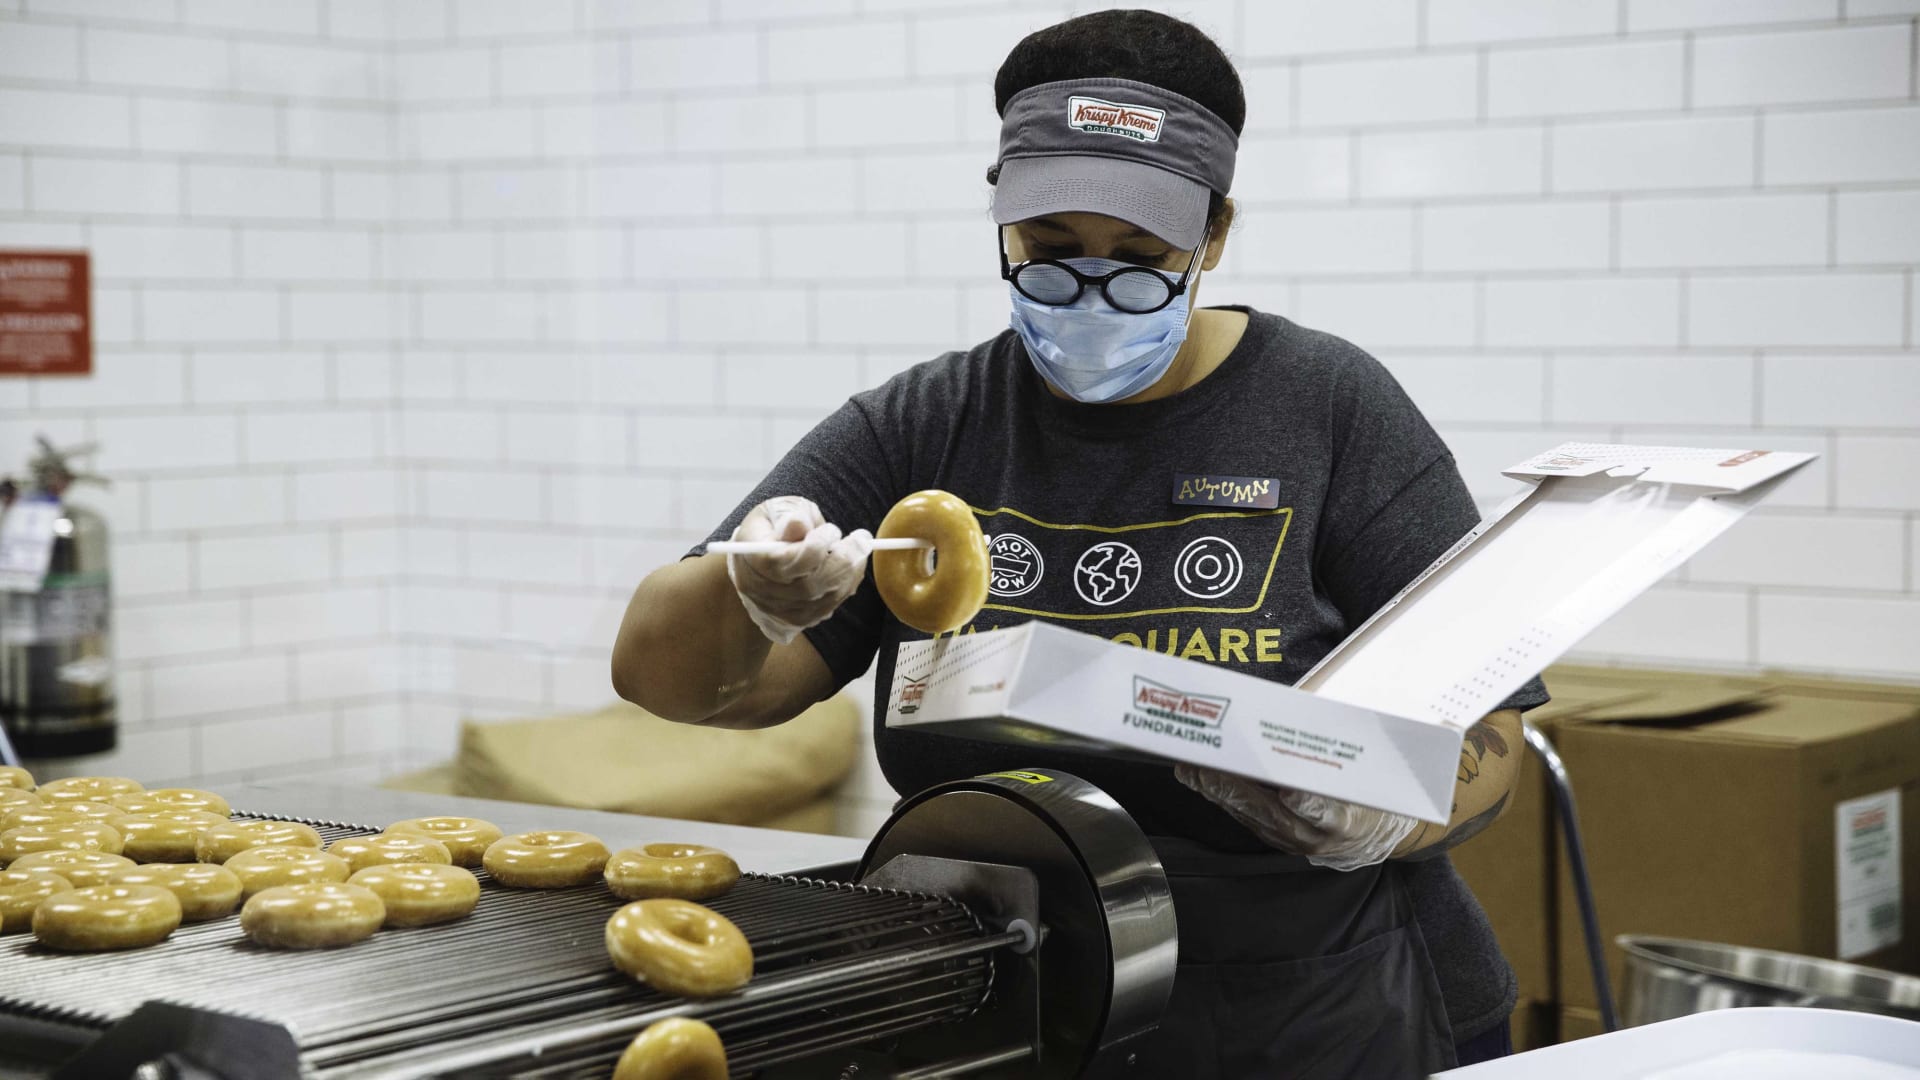 Krispy Kreme Gives Free Doughnuts All Year to Anyone Who's Had a Vaccine. Here's Why That's Smart